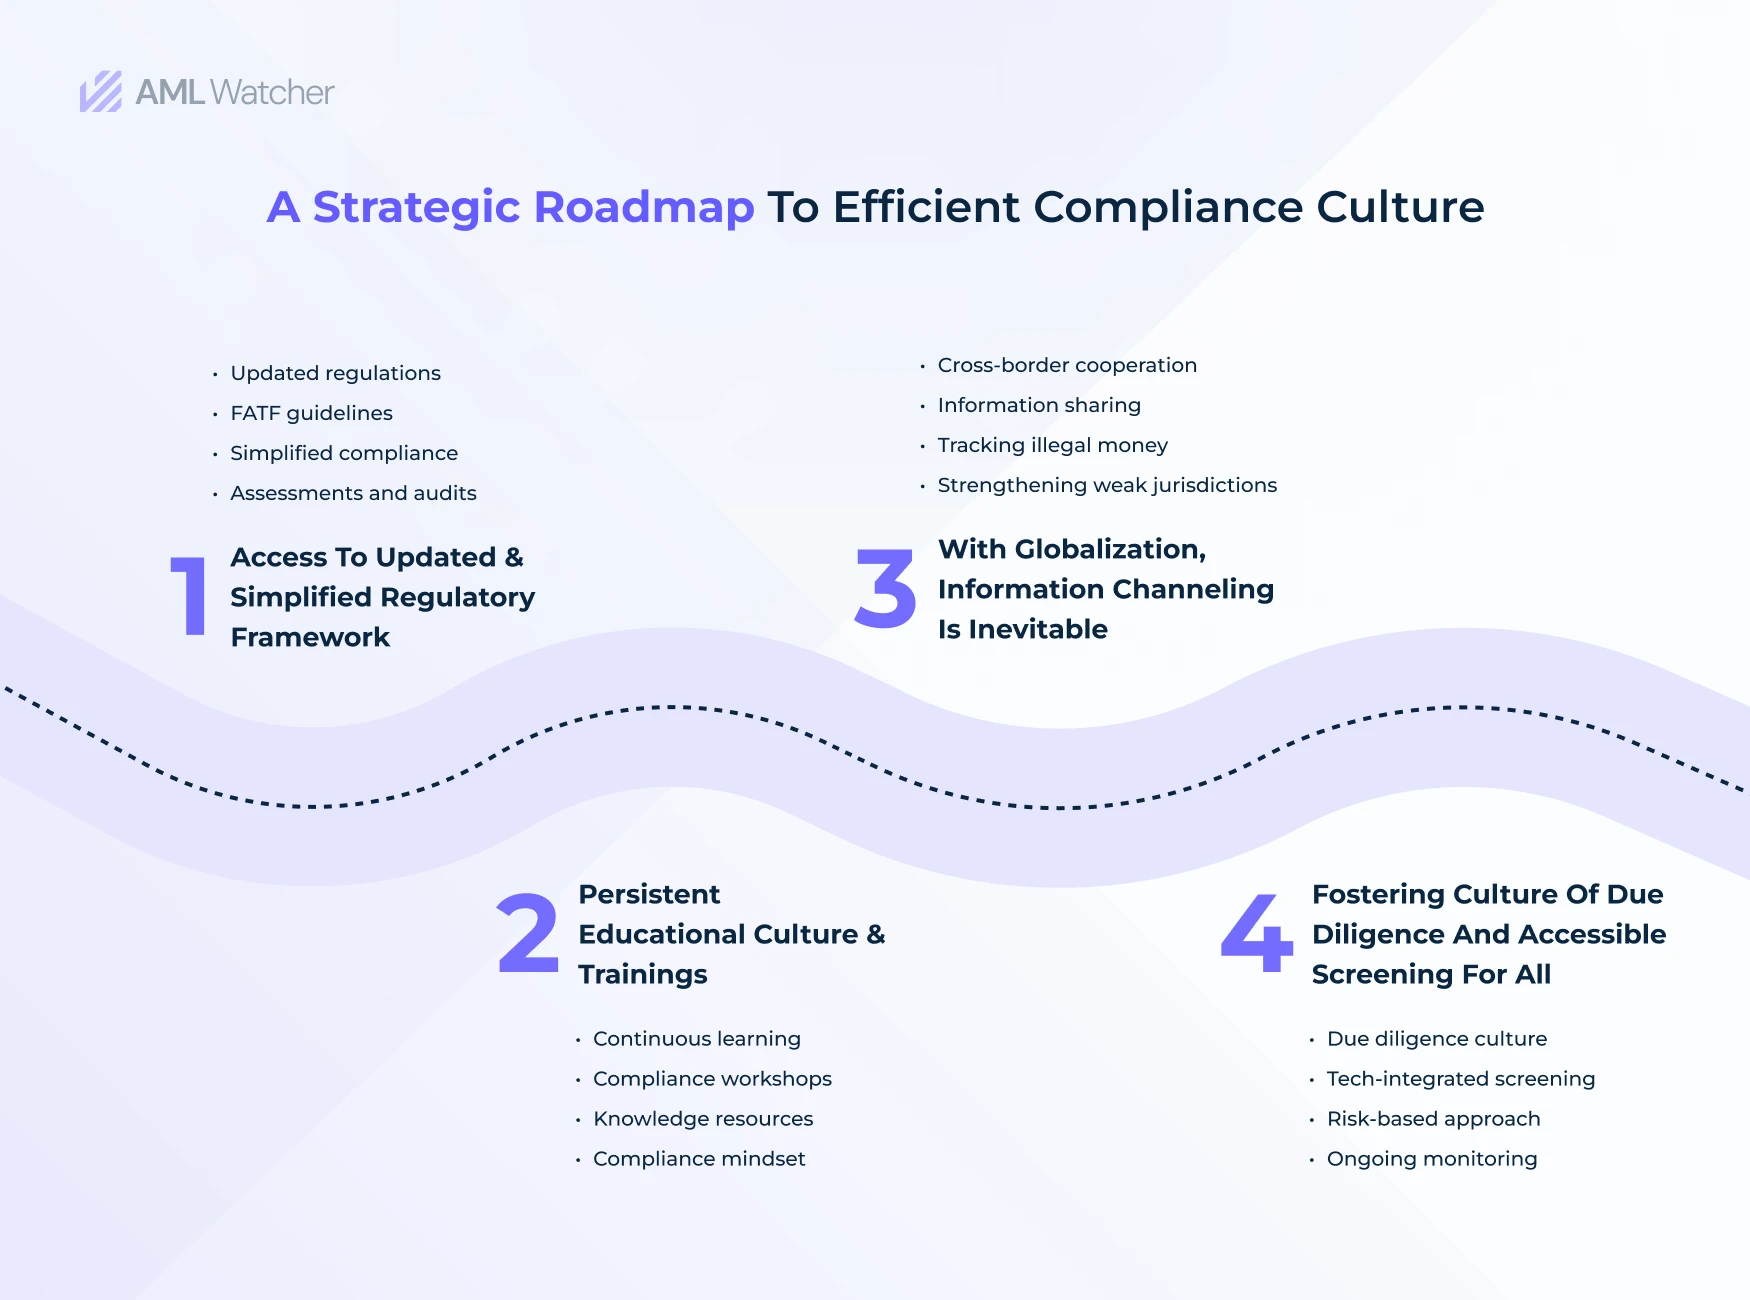 A comprehensive roadmap to develop compliance culture within organizations. It includes an accessible and updated regulatory framework, a culture of continuous knowledge development, cross-border channeling of the information, and due diligence embedded with impactful screening. 